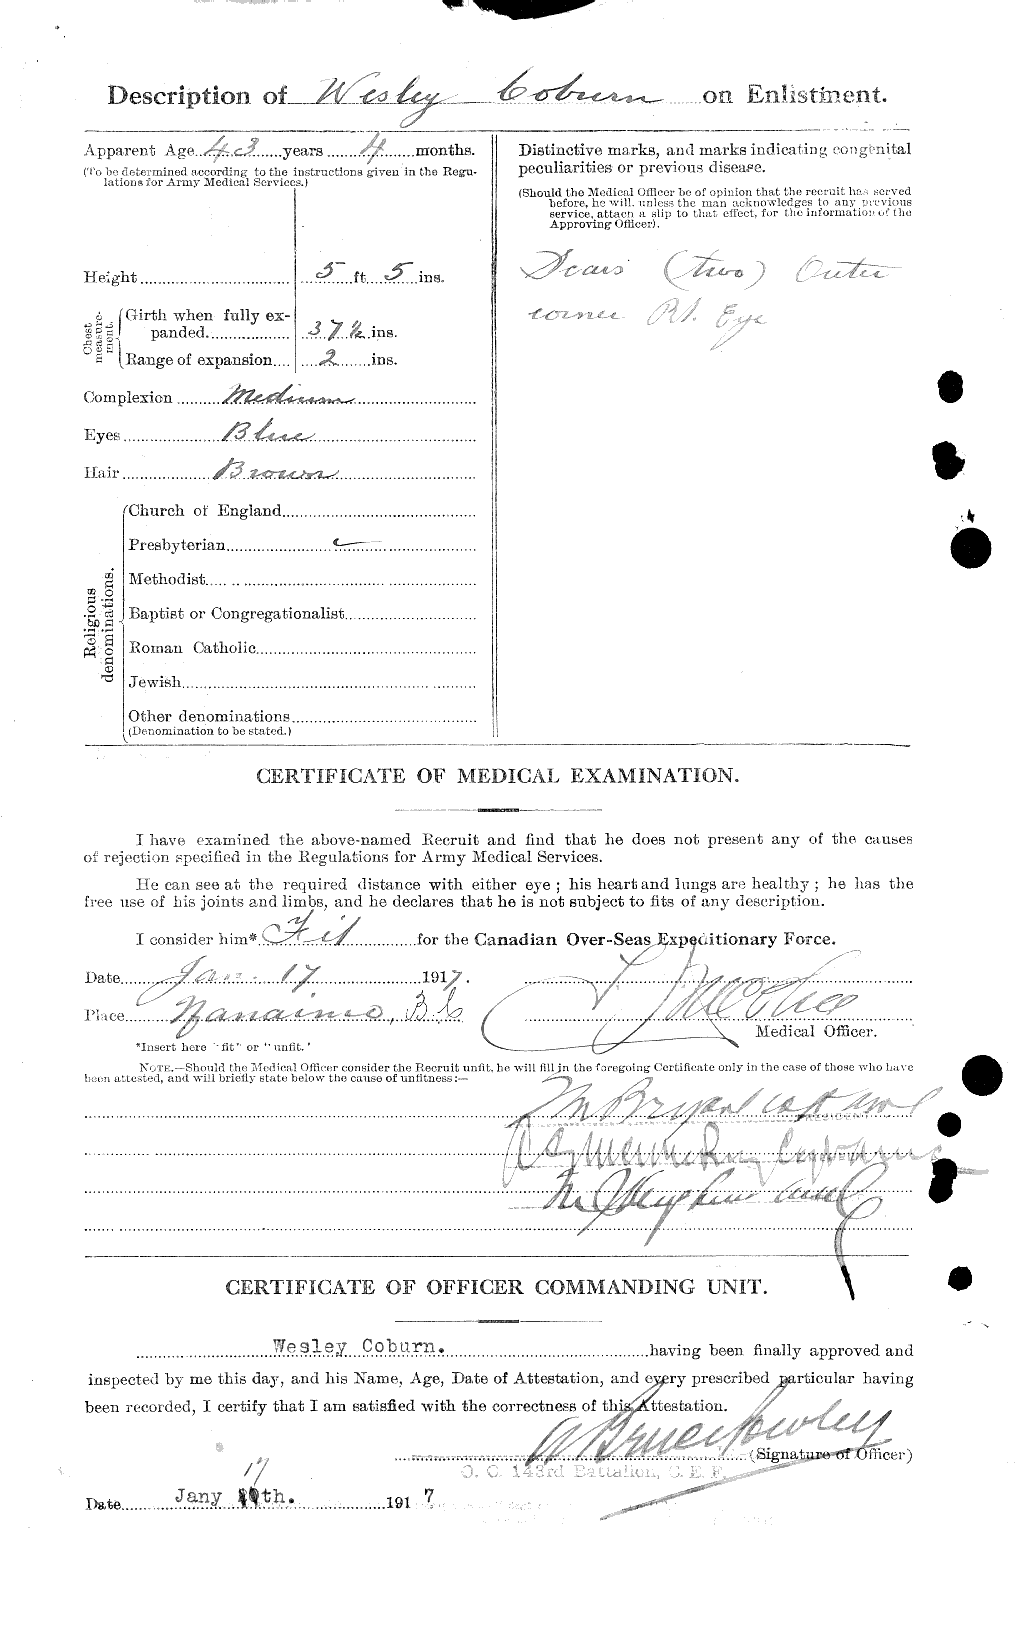 Personnel Records of the First World War - CEF 025791b